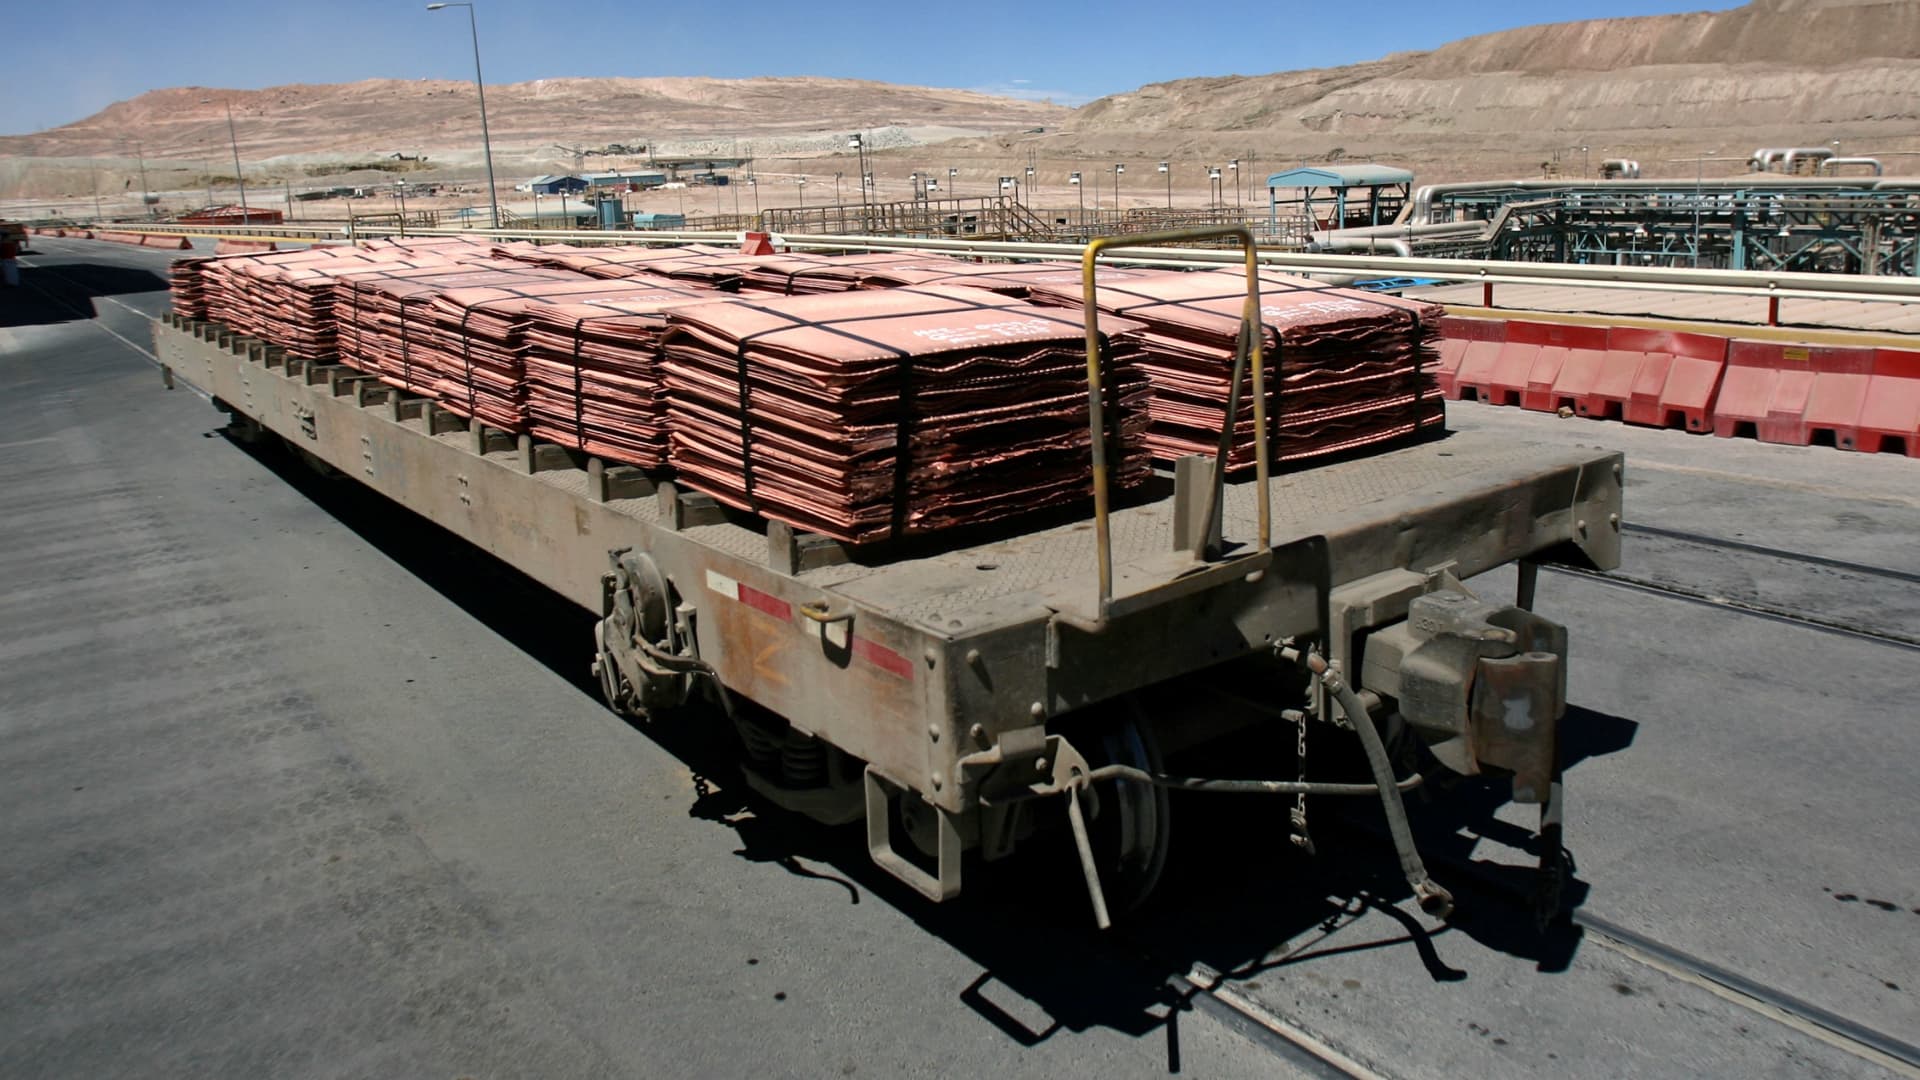 Copper prices  traditionally a barometer for the global economy  are expected to soar next year